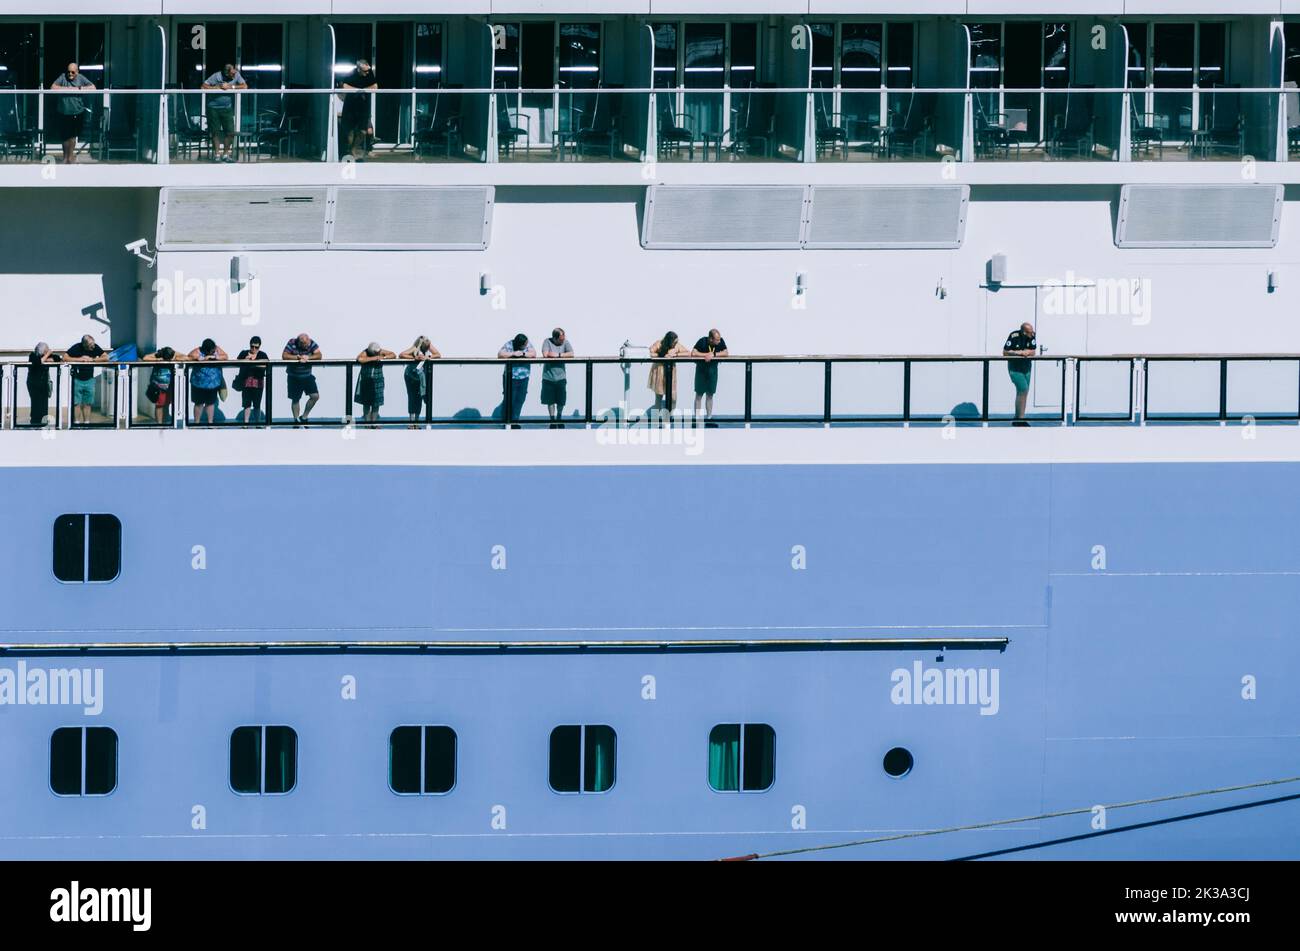 Vigo, Spain - Sept 25, 2022: People looking out from the deck of a modern cruise ship in Vigo, Spain Stock Photo